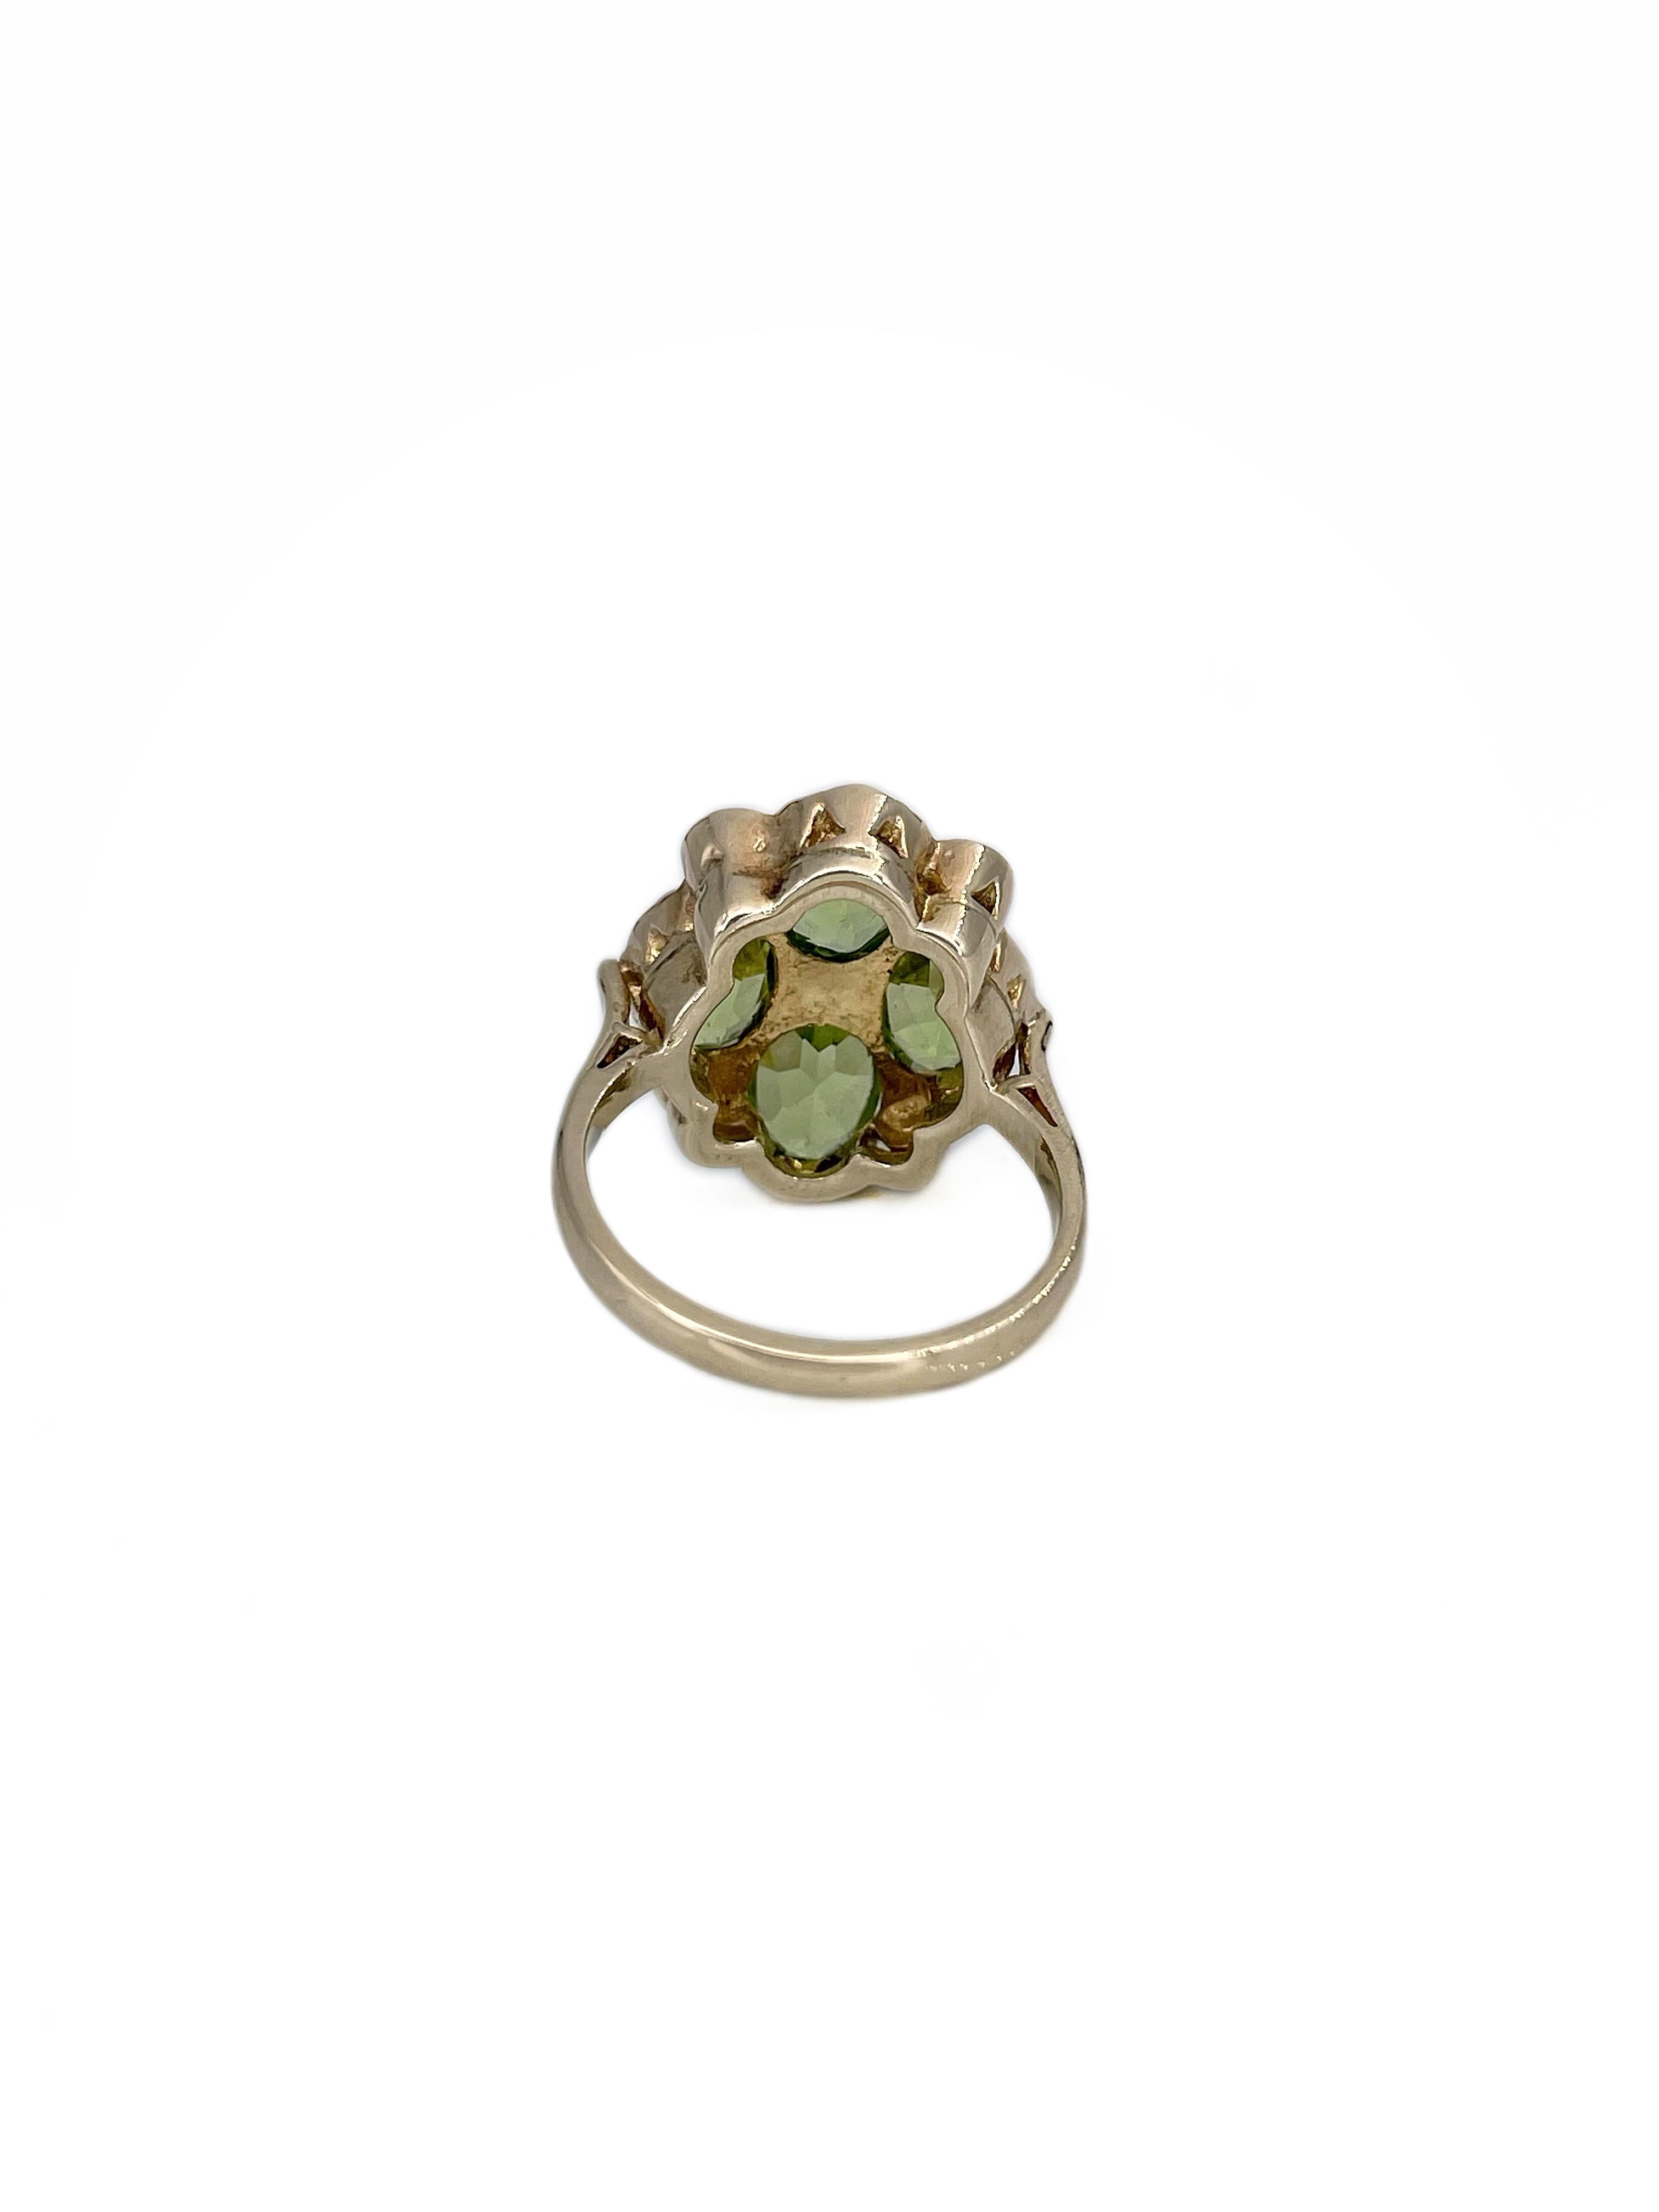 Women's Mid Century 9 Karat Gold Peridot Seed Pearl Cocktail Ring For Sale